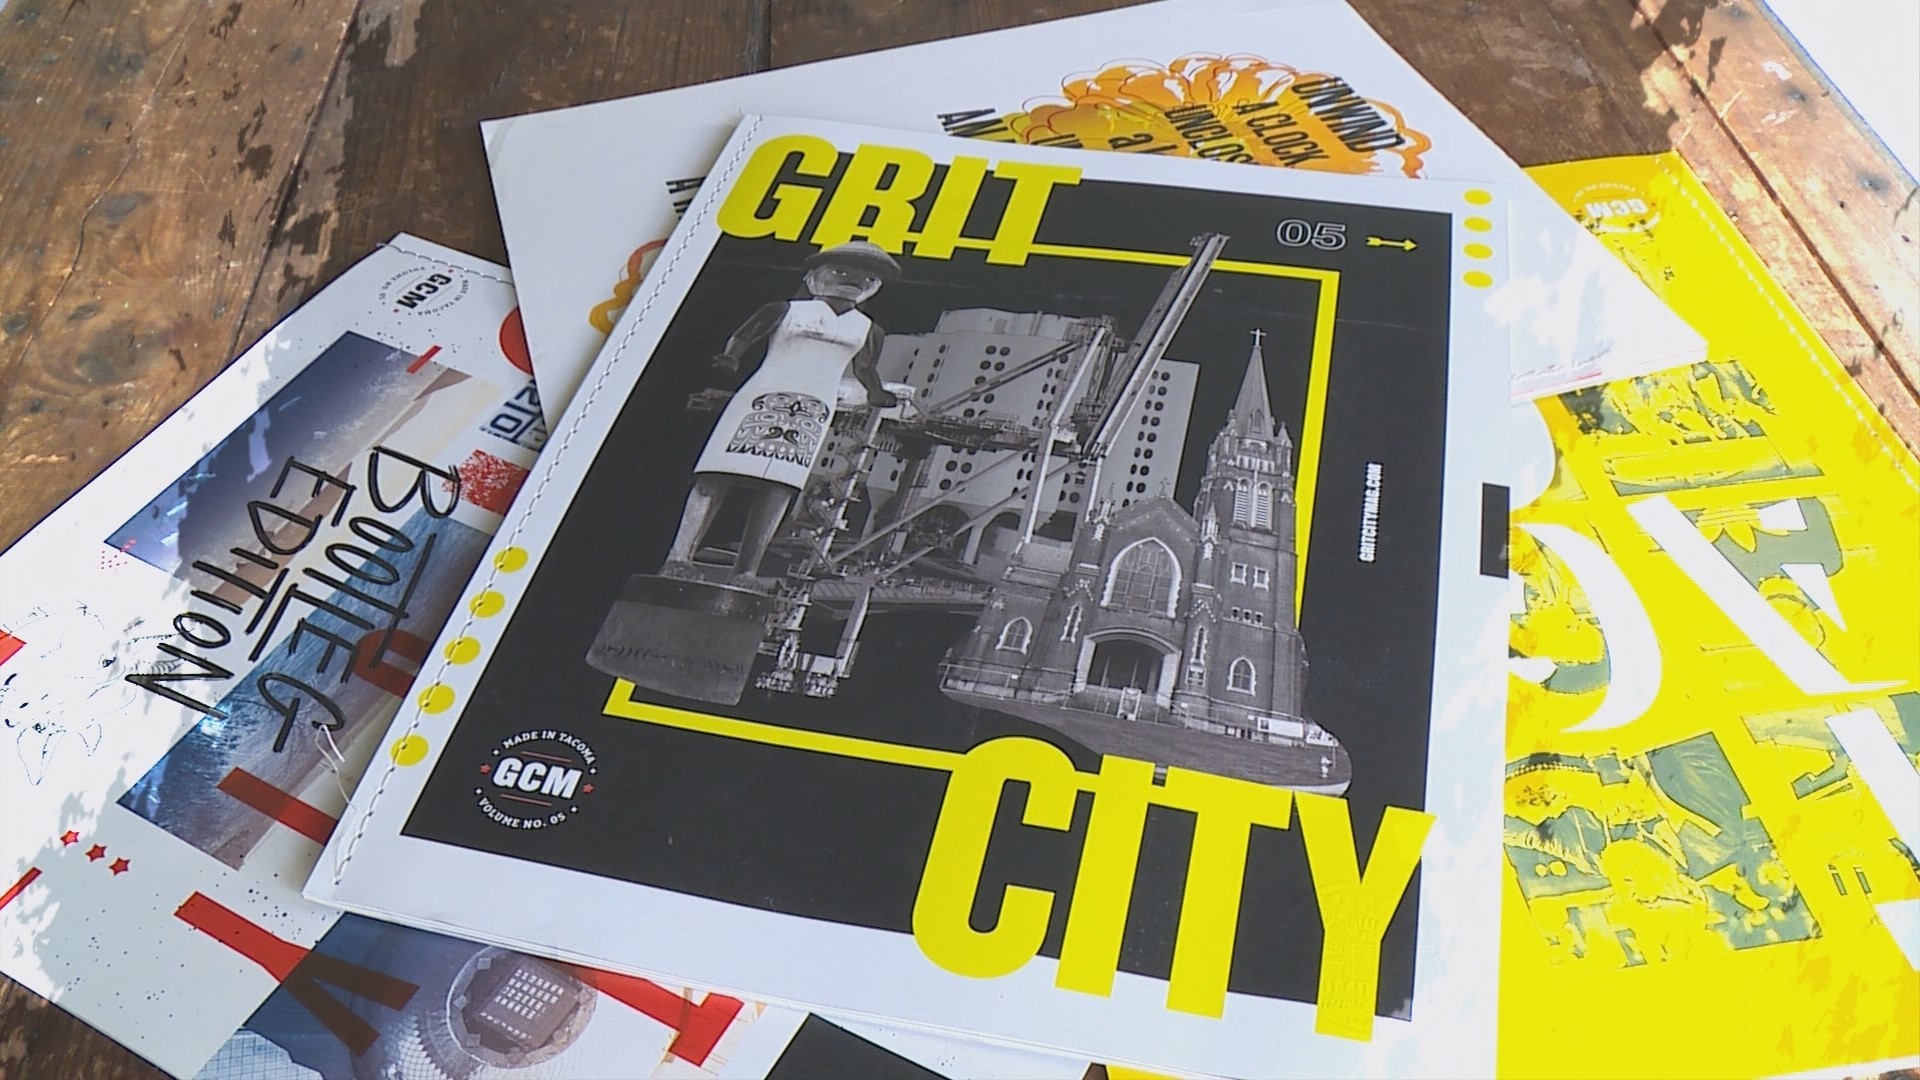 Grit City Magazine seeks out the untold stories in The City of Destiny.